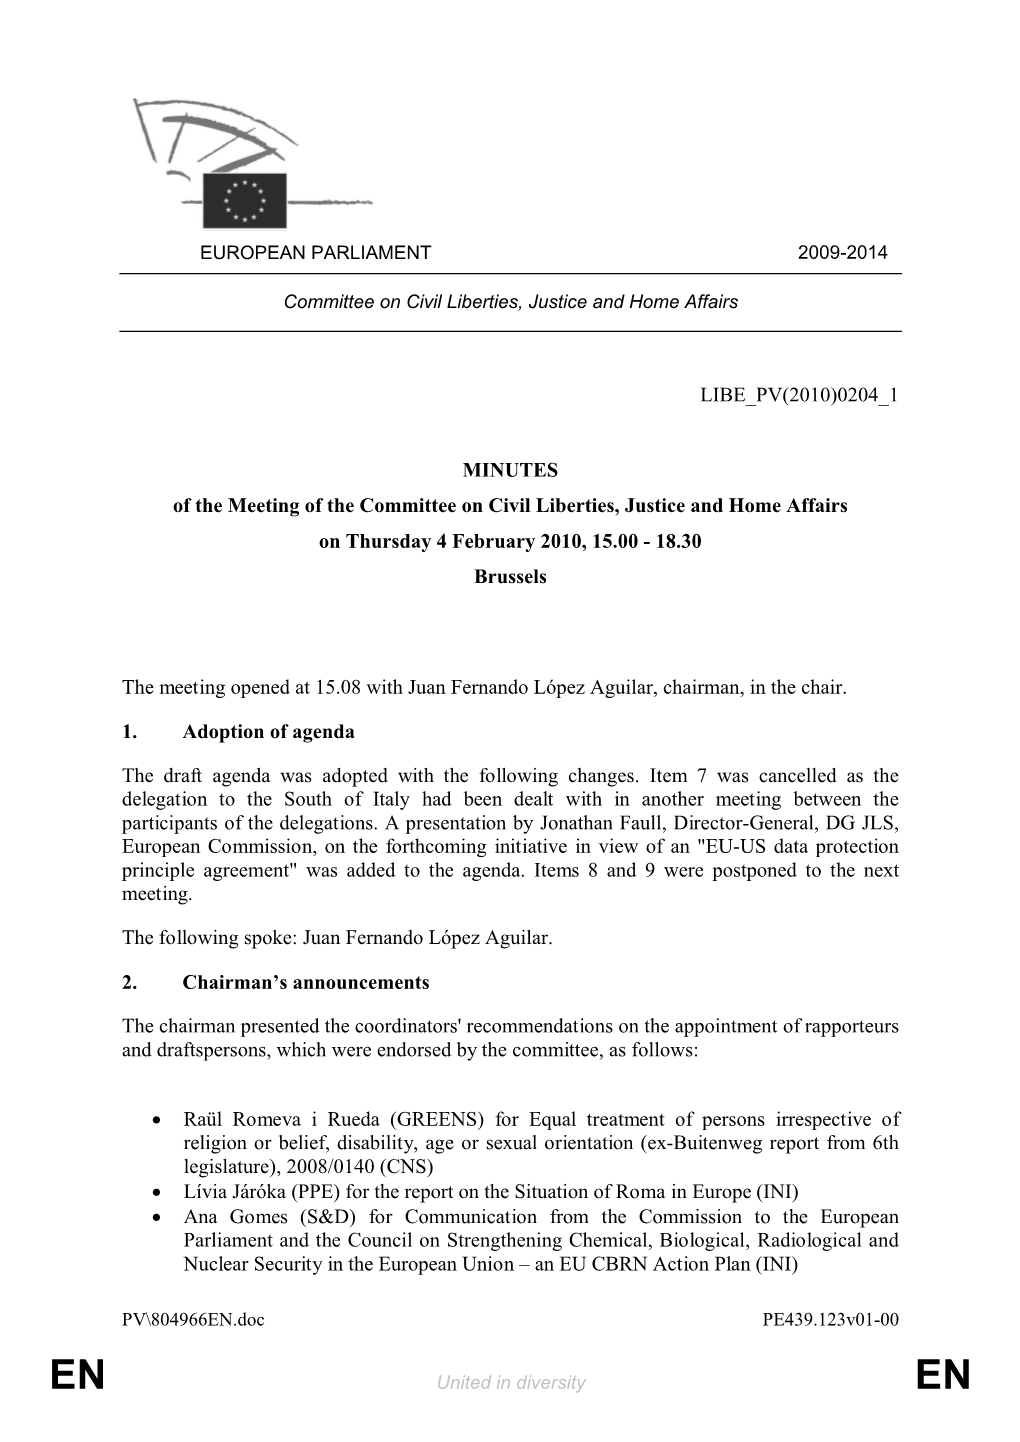 0204 1 MINUTES of the Meeting of the Committee on Civil Liberties, Justice and Home Affairs on Thursday 4 February